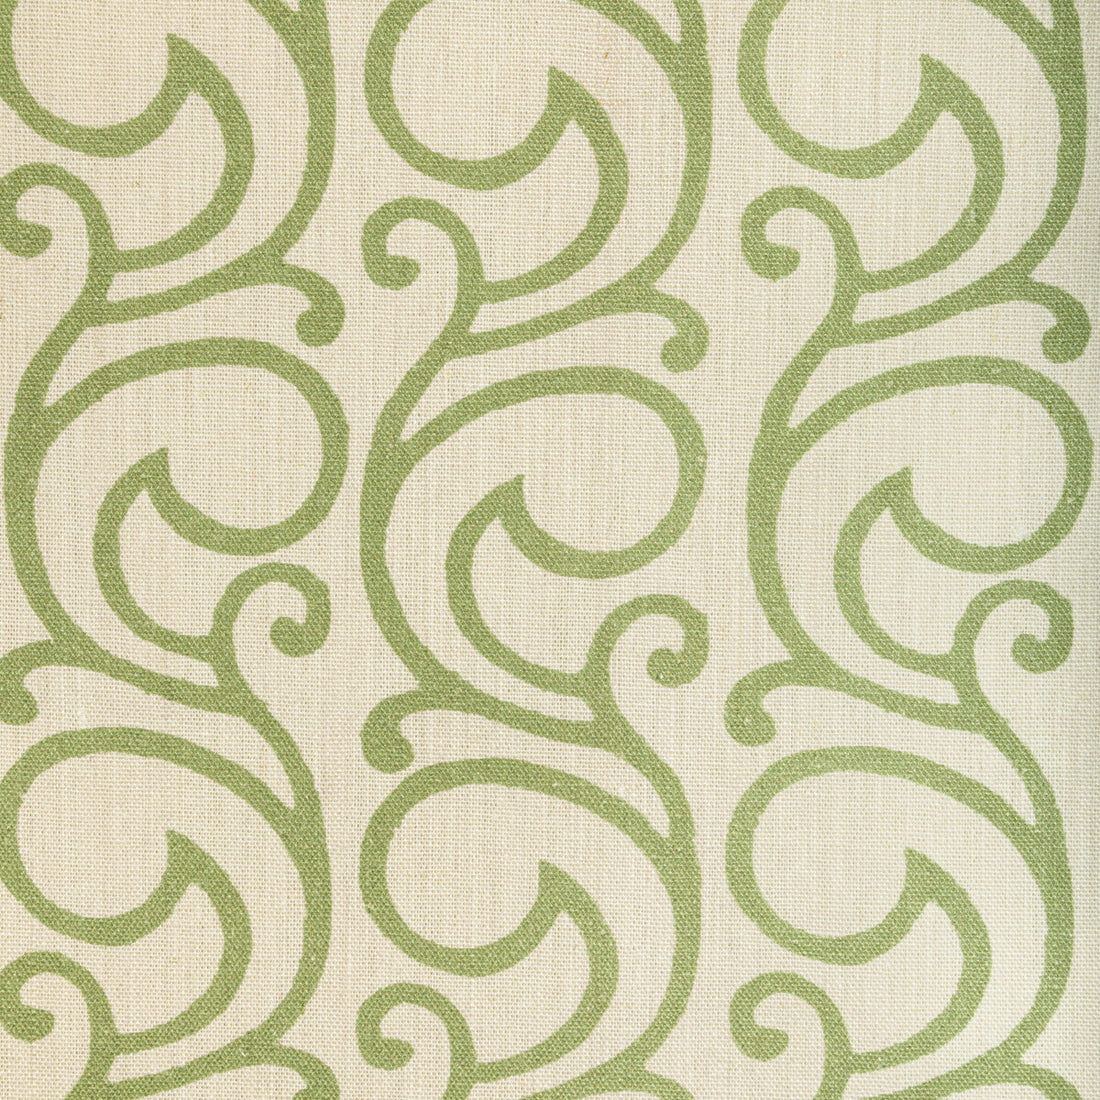 Serendipity Scroll fabric in elm color - pattern 2022103.3.0 - by Lee Jofa in the Sarah Bartholomew collection